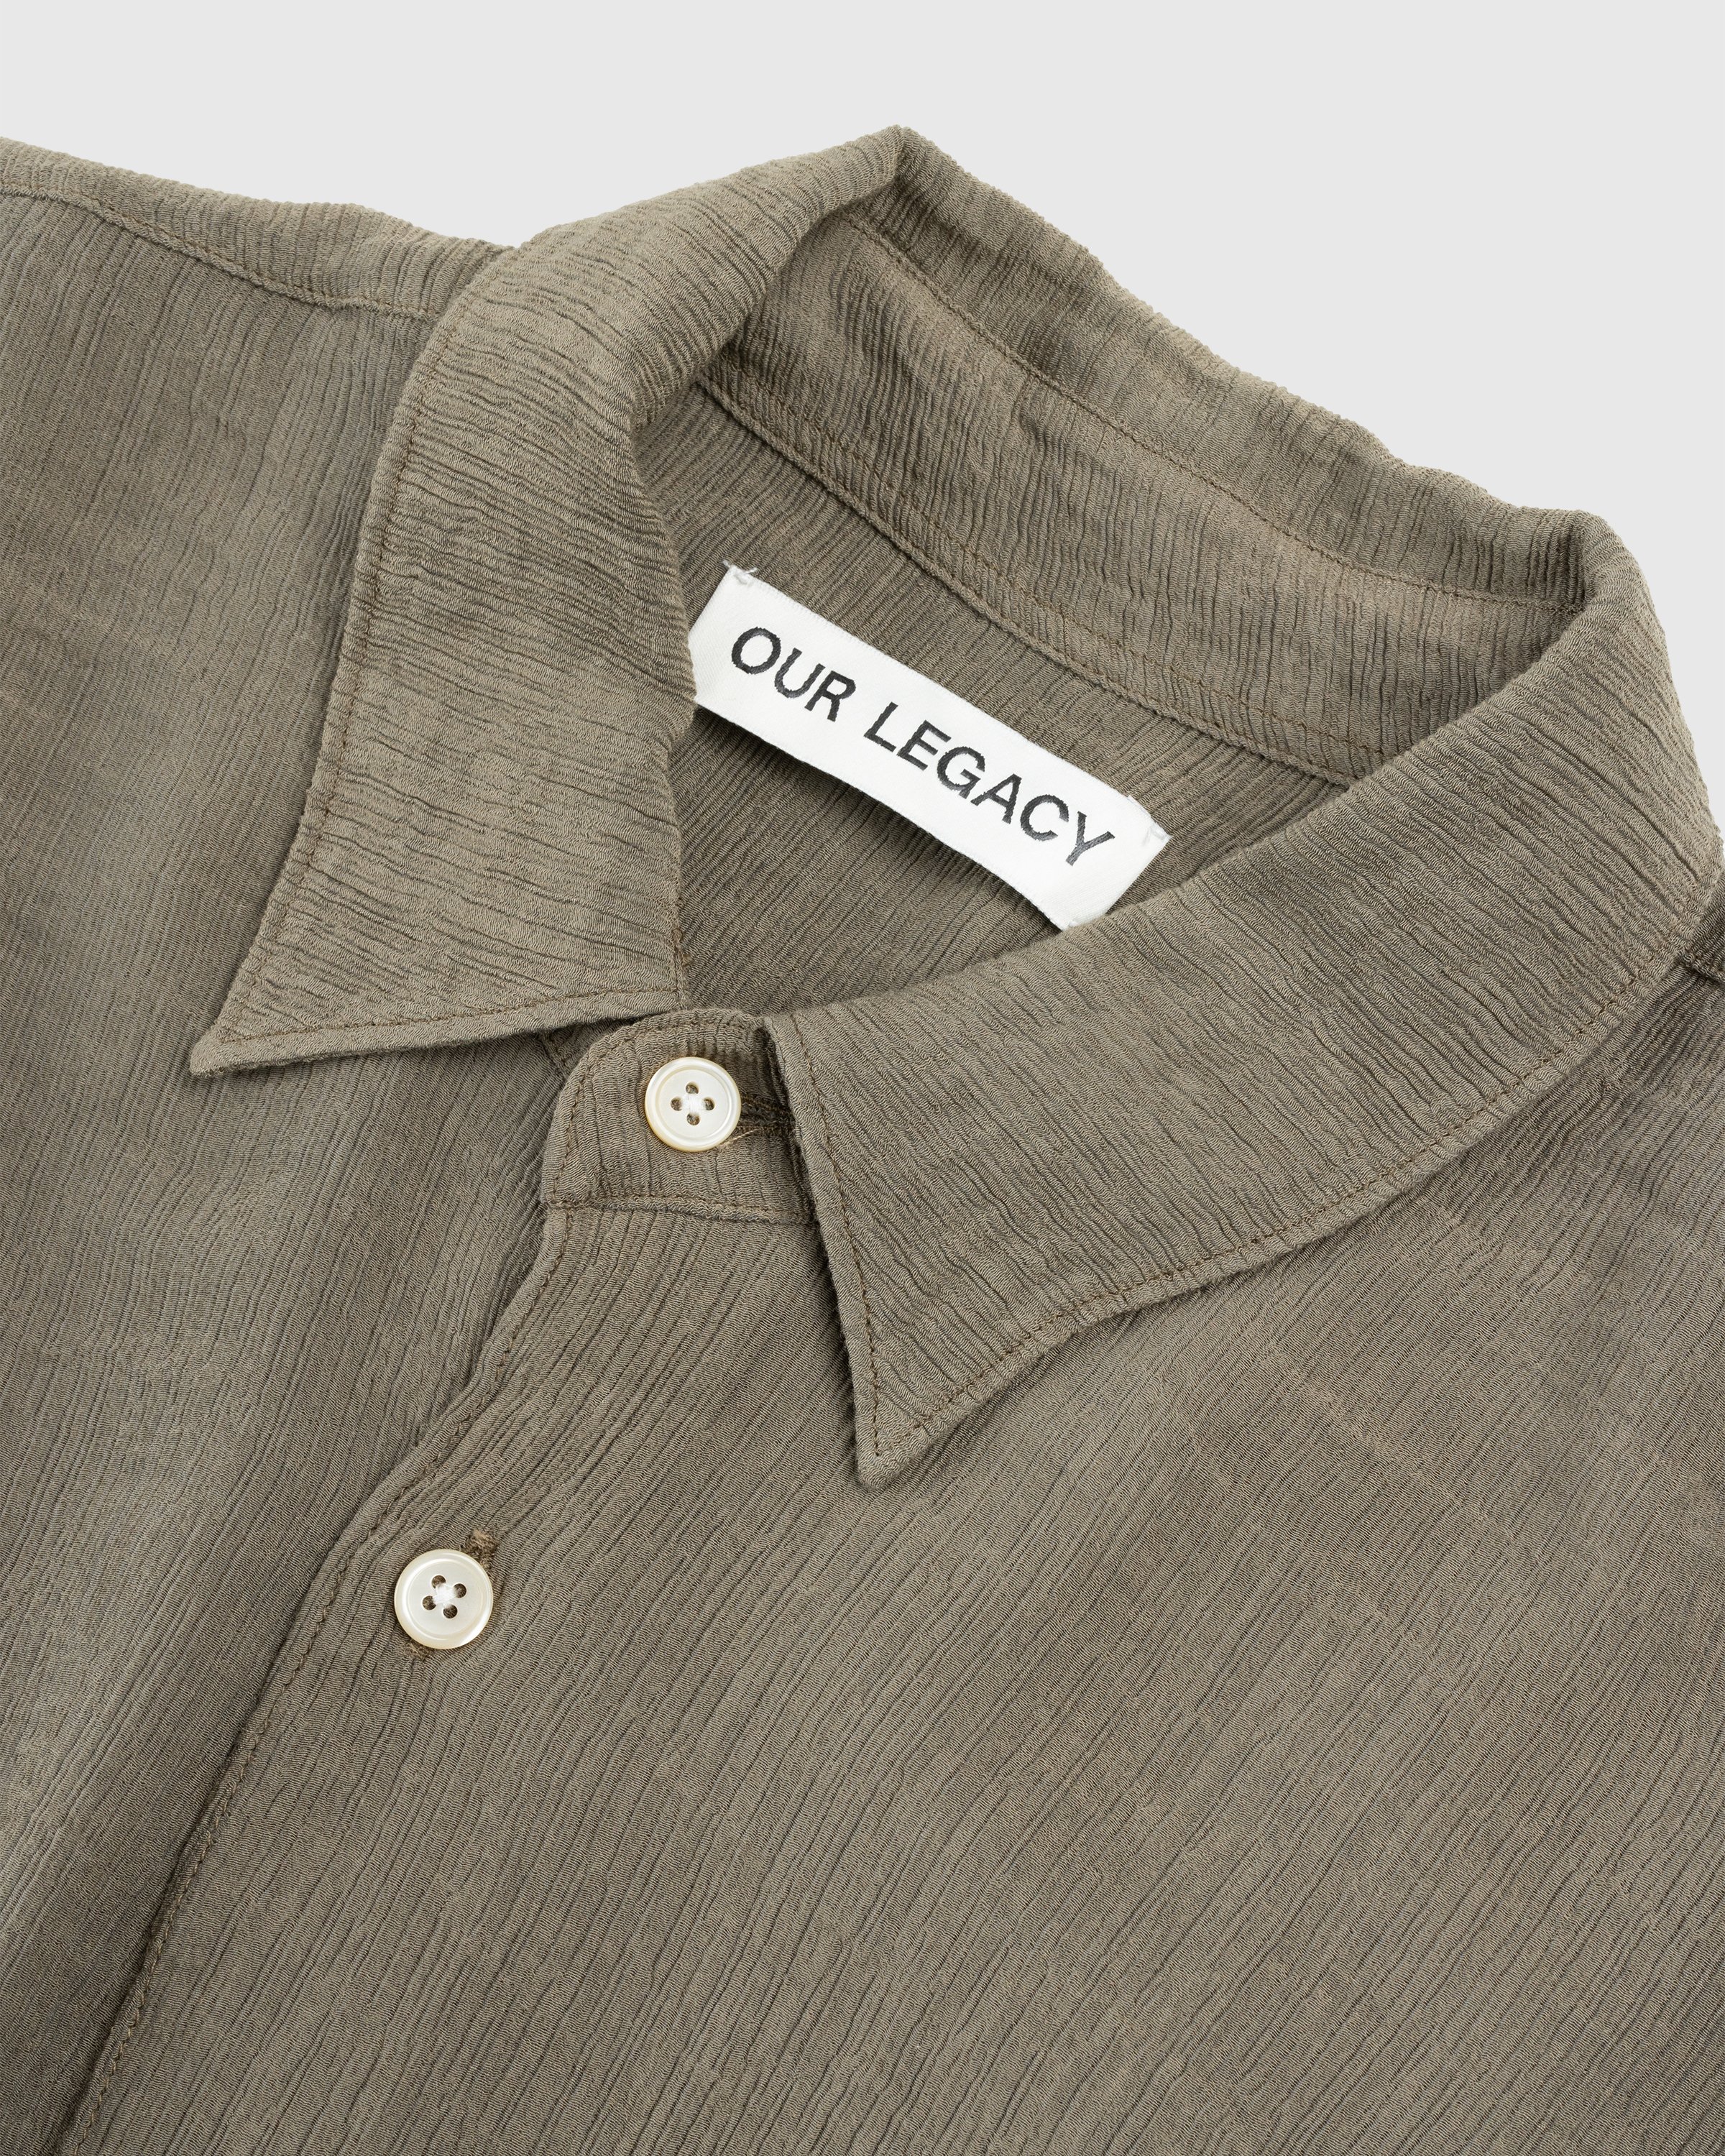 Our Legacy - Initial Shirt Muck Ruffle Viscose - Clothing - Brown - Image 5